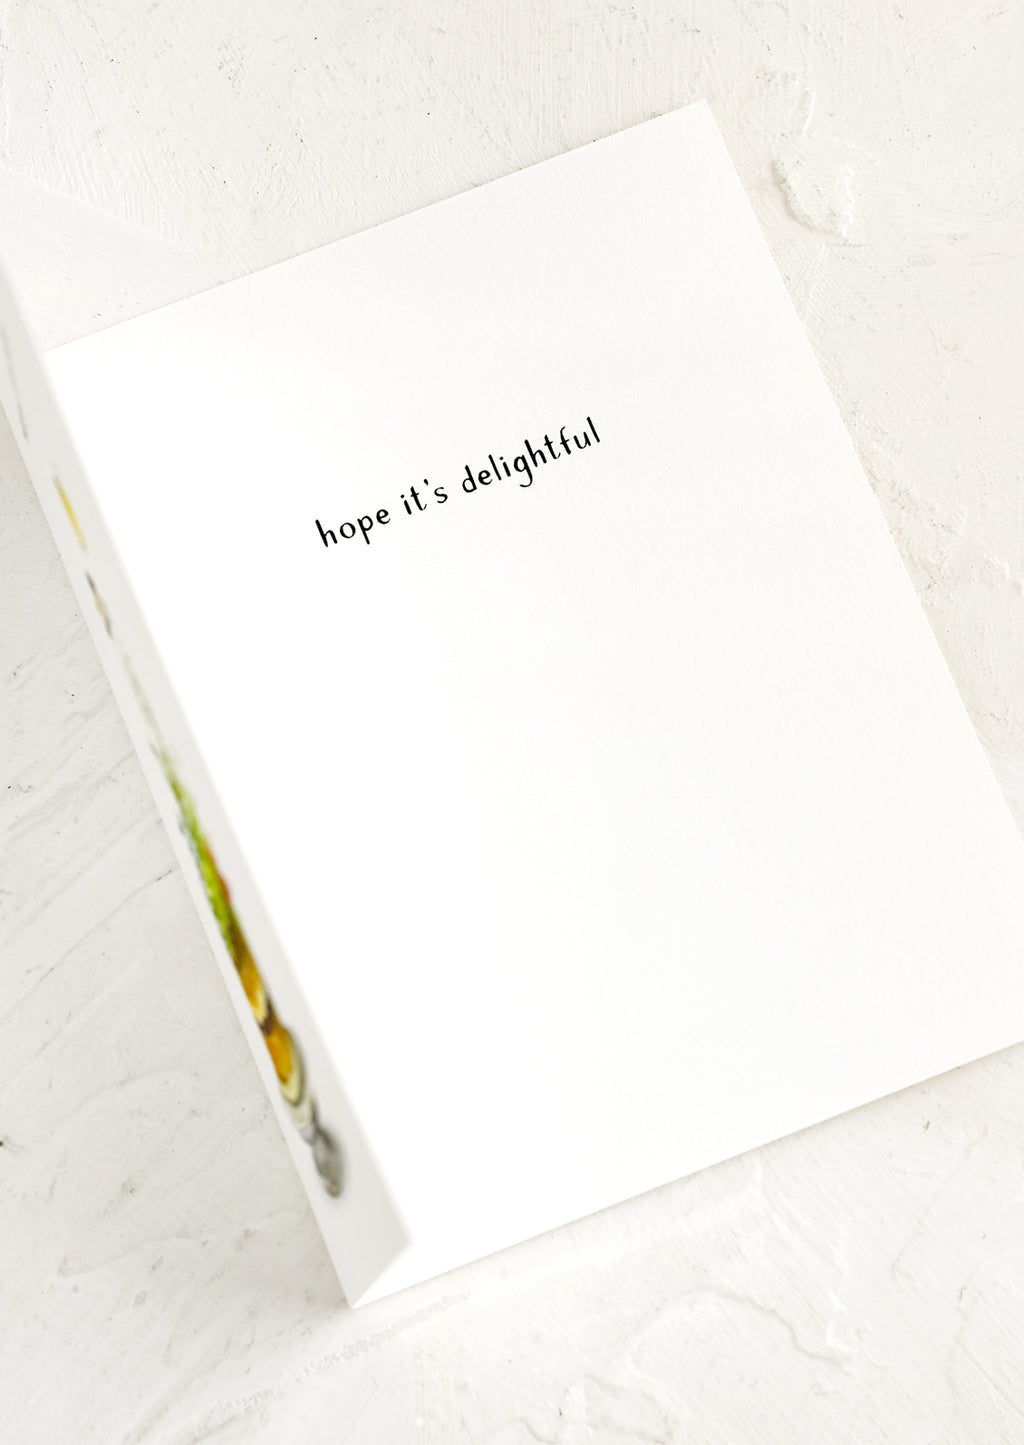 2: Greeting card with interior text.